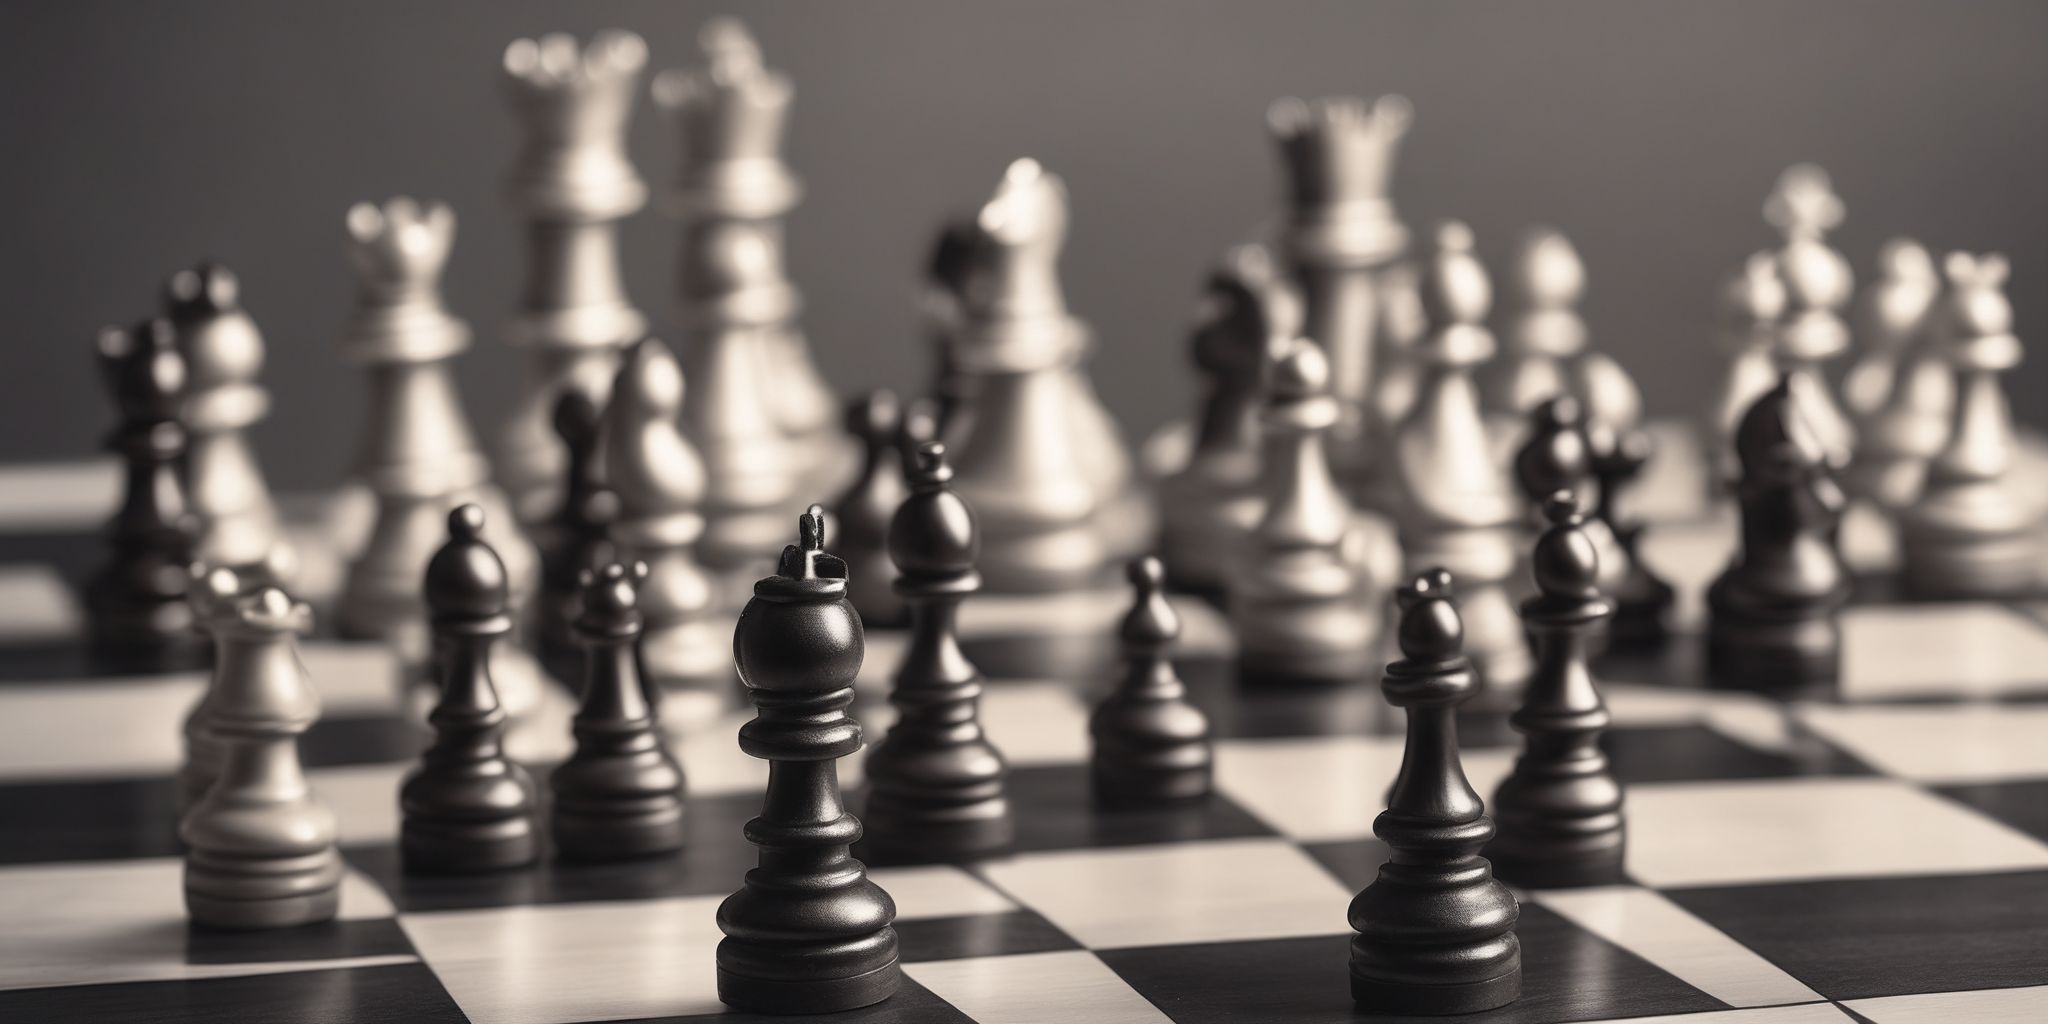 Financial chess  in realistic, photographic style